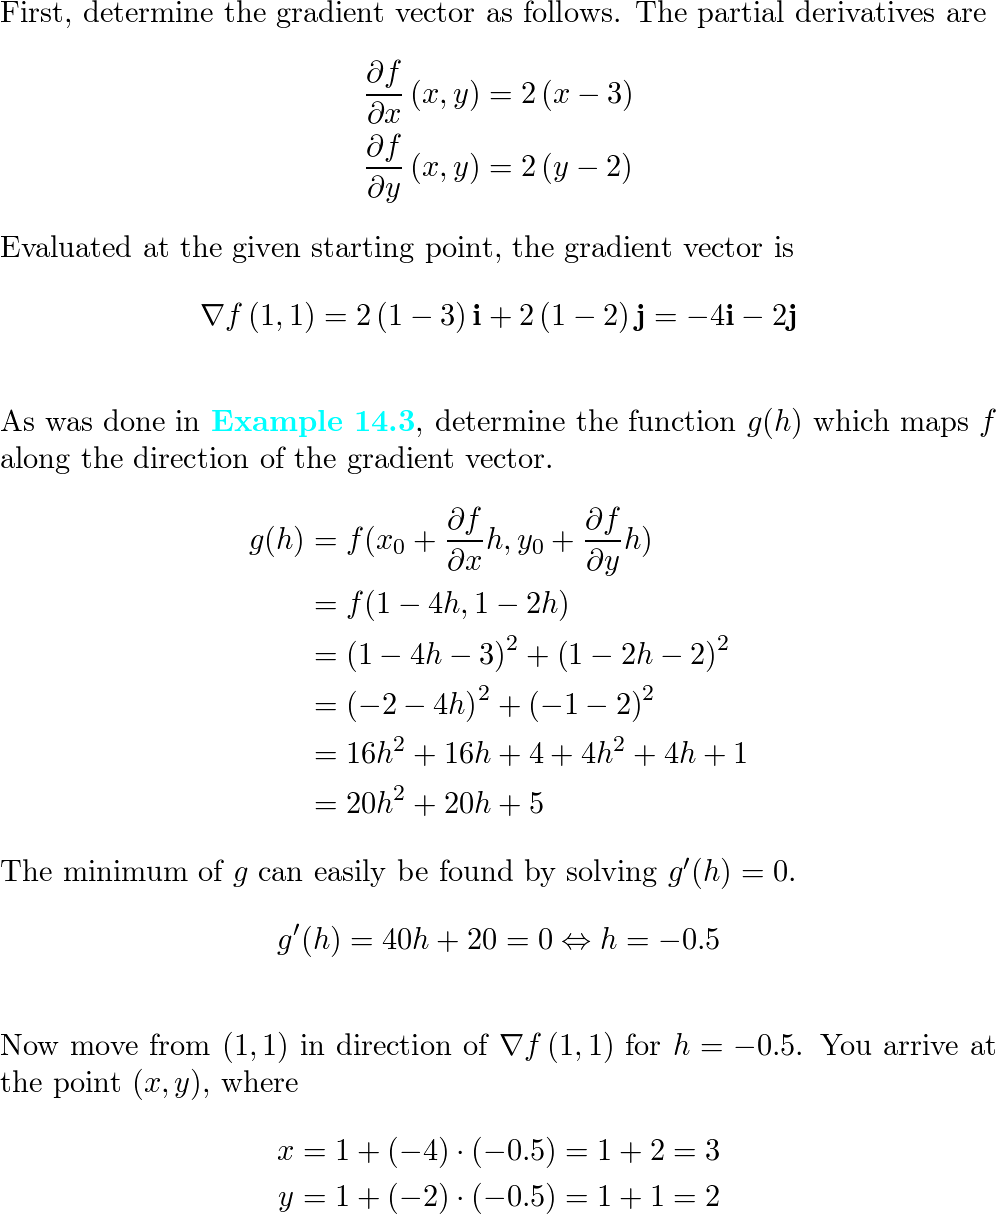 Solved Steepest Descent Algorithm (1) 1. [20] Given a